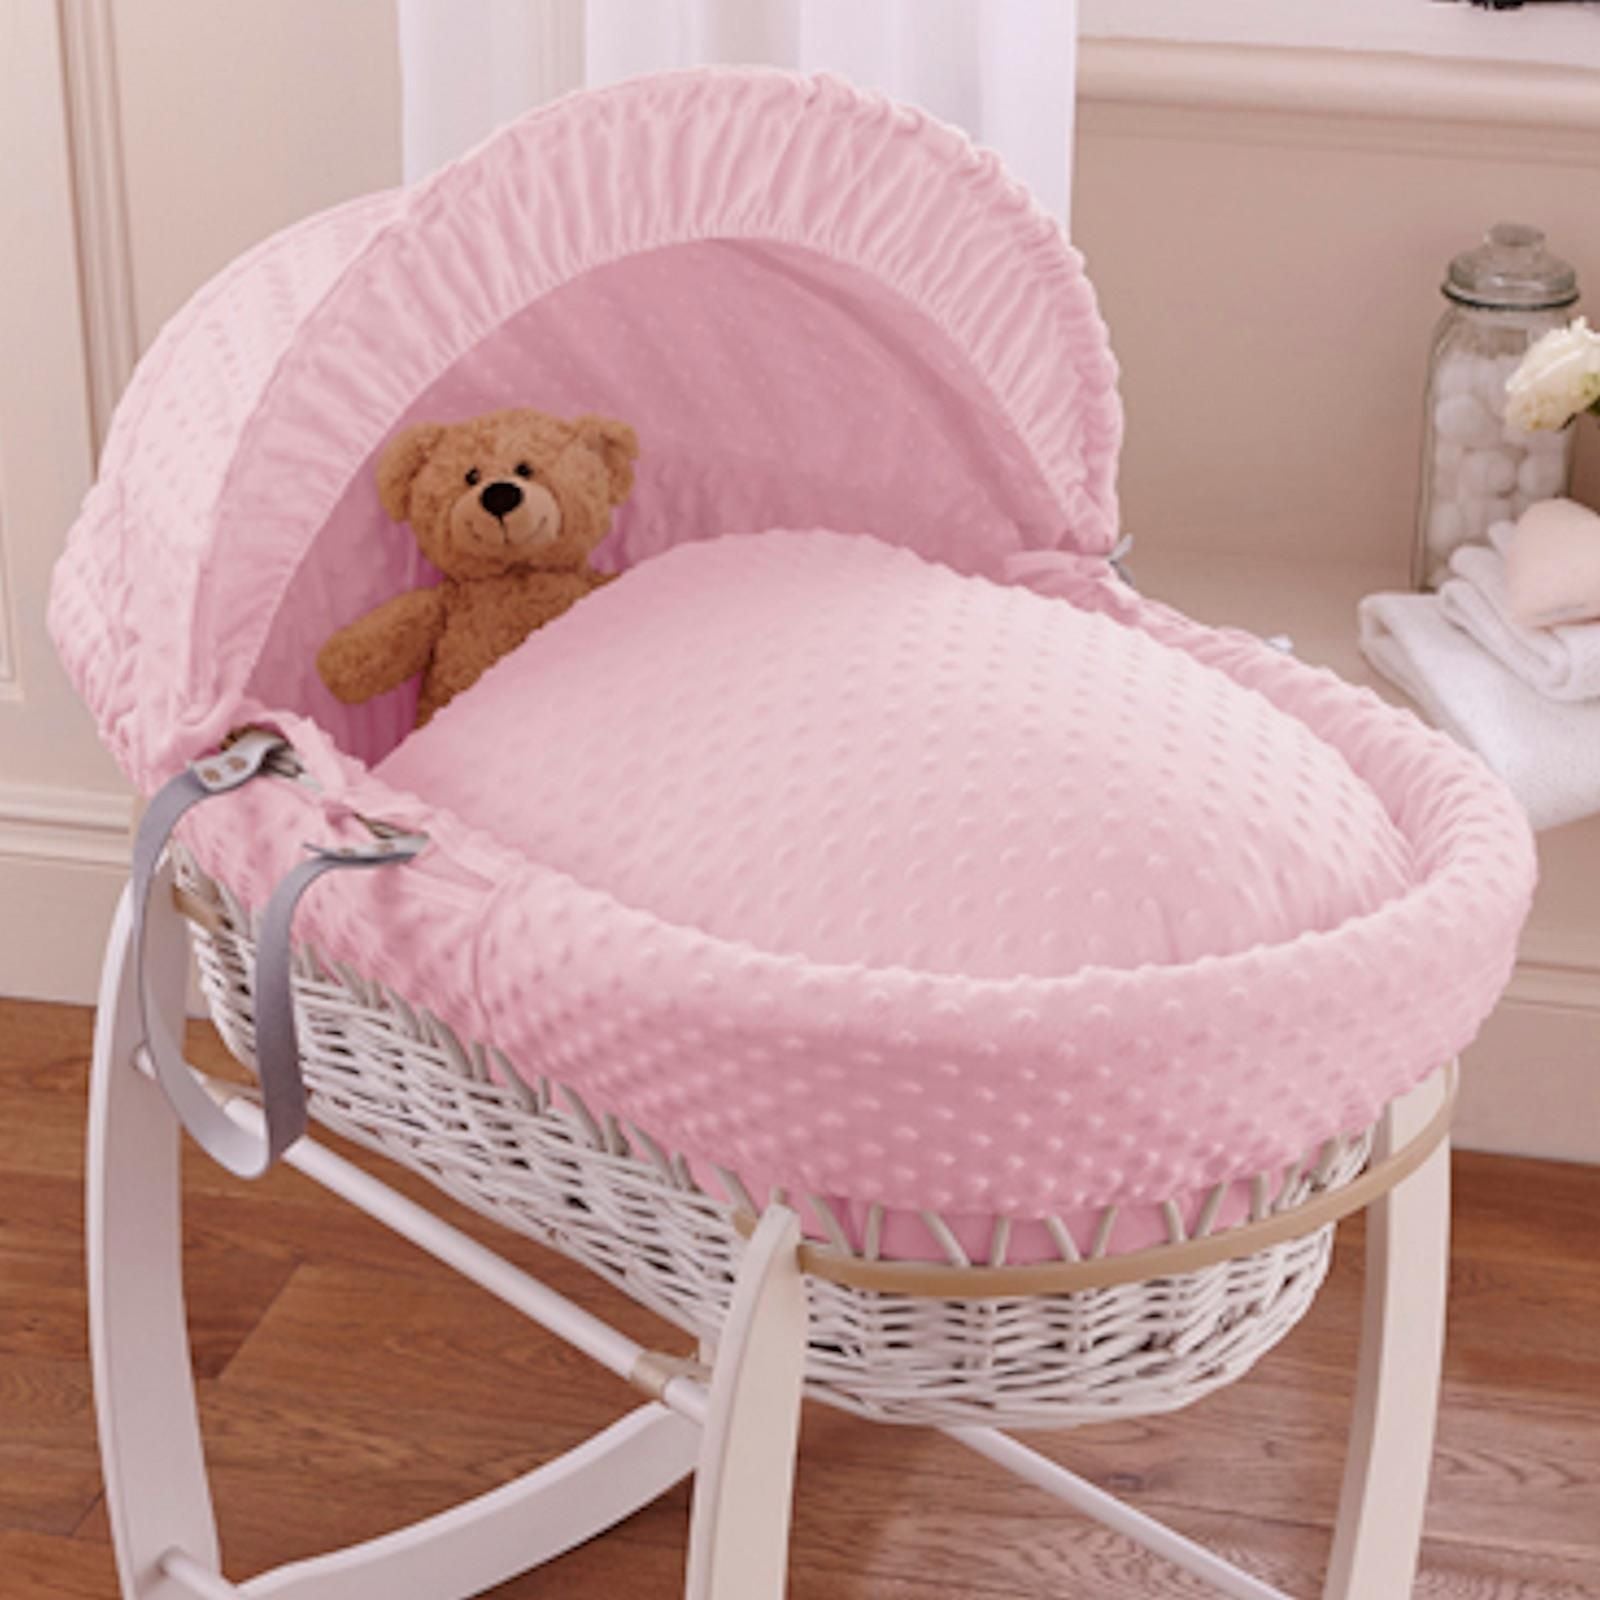 Clair de Lune White wicker Moses Basket Pink dimples - Click & Collect Only